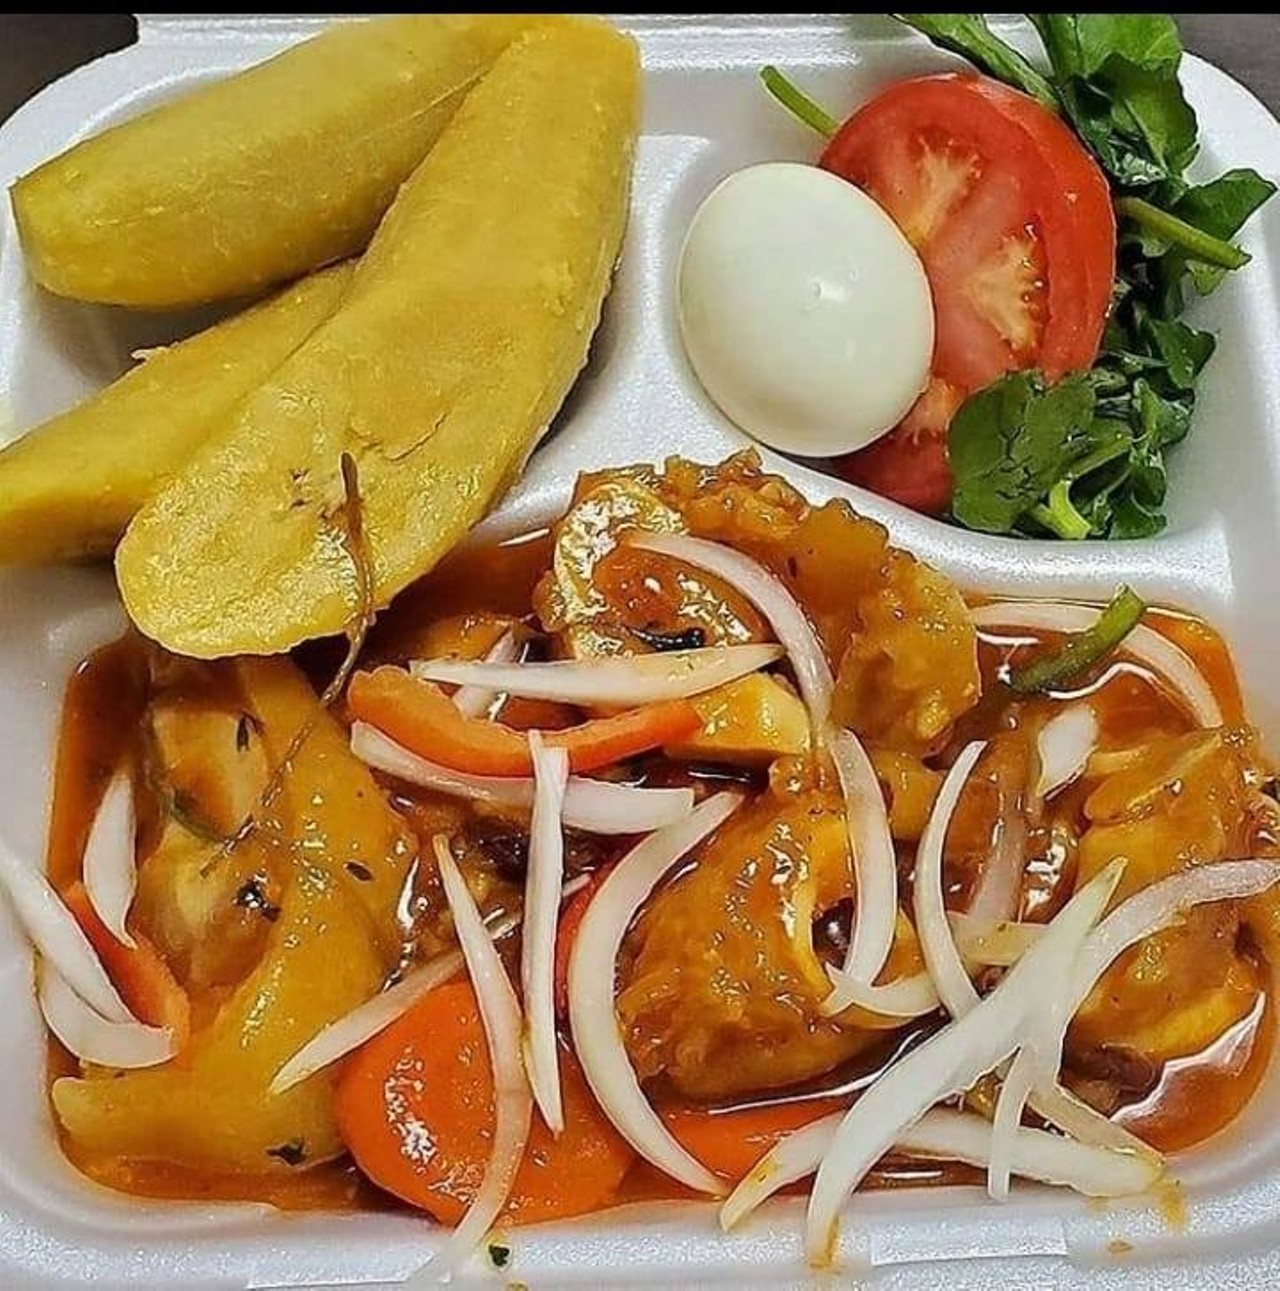 Antille&#146;s Cuisine Caribbean Restaurant 
2798 Hiawsee Rd, 407-440-8428
Not just Haitian food - Antille&#146;s Cuisine occasionally holds events with music for its customers.
Photo via Antille&#146;s Cuisine Caribbean Restaurant/Facebook